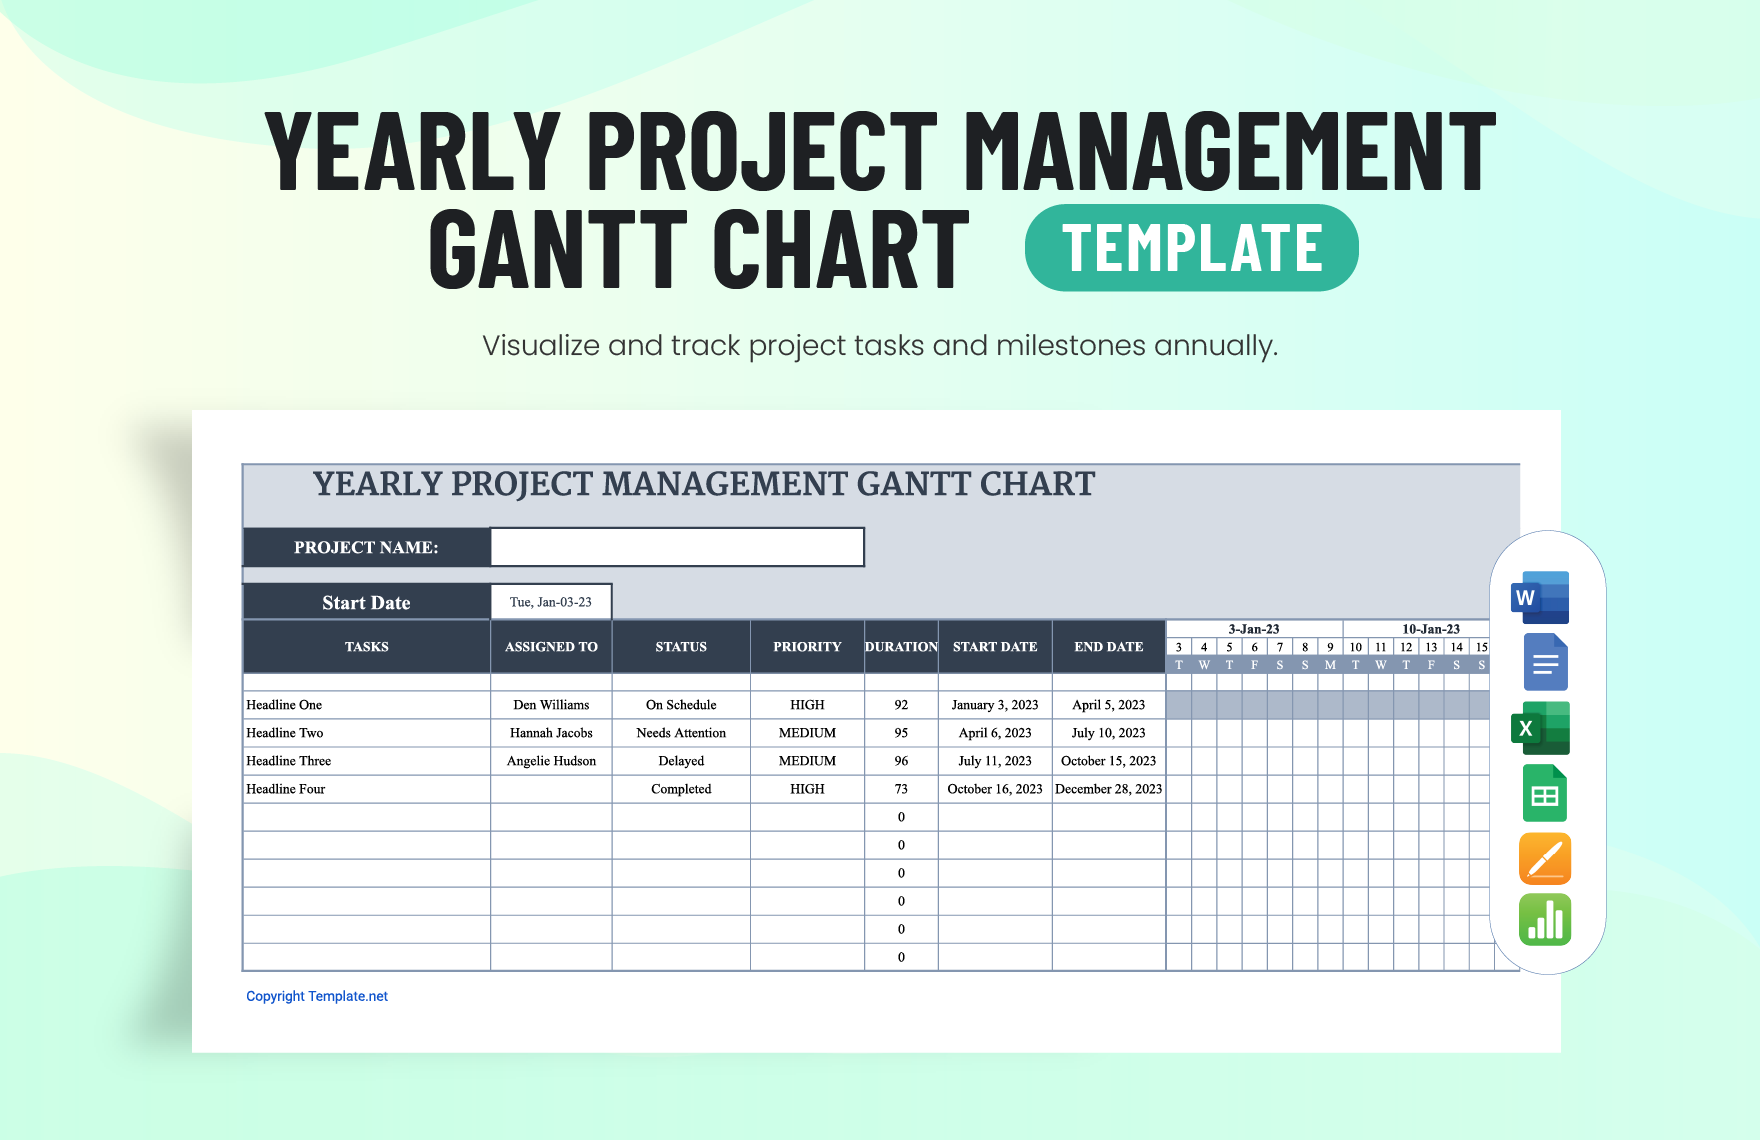 Yearly Project Management Gantt Chart Template in Word, Excel, Google Sheets, Apple Pages, Apple Numbers